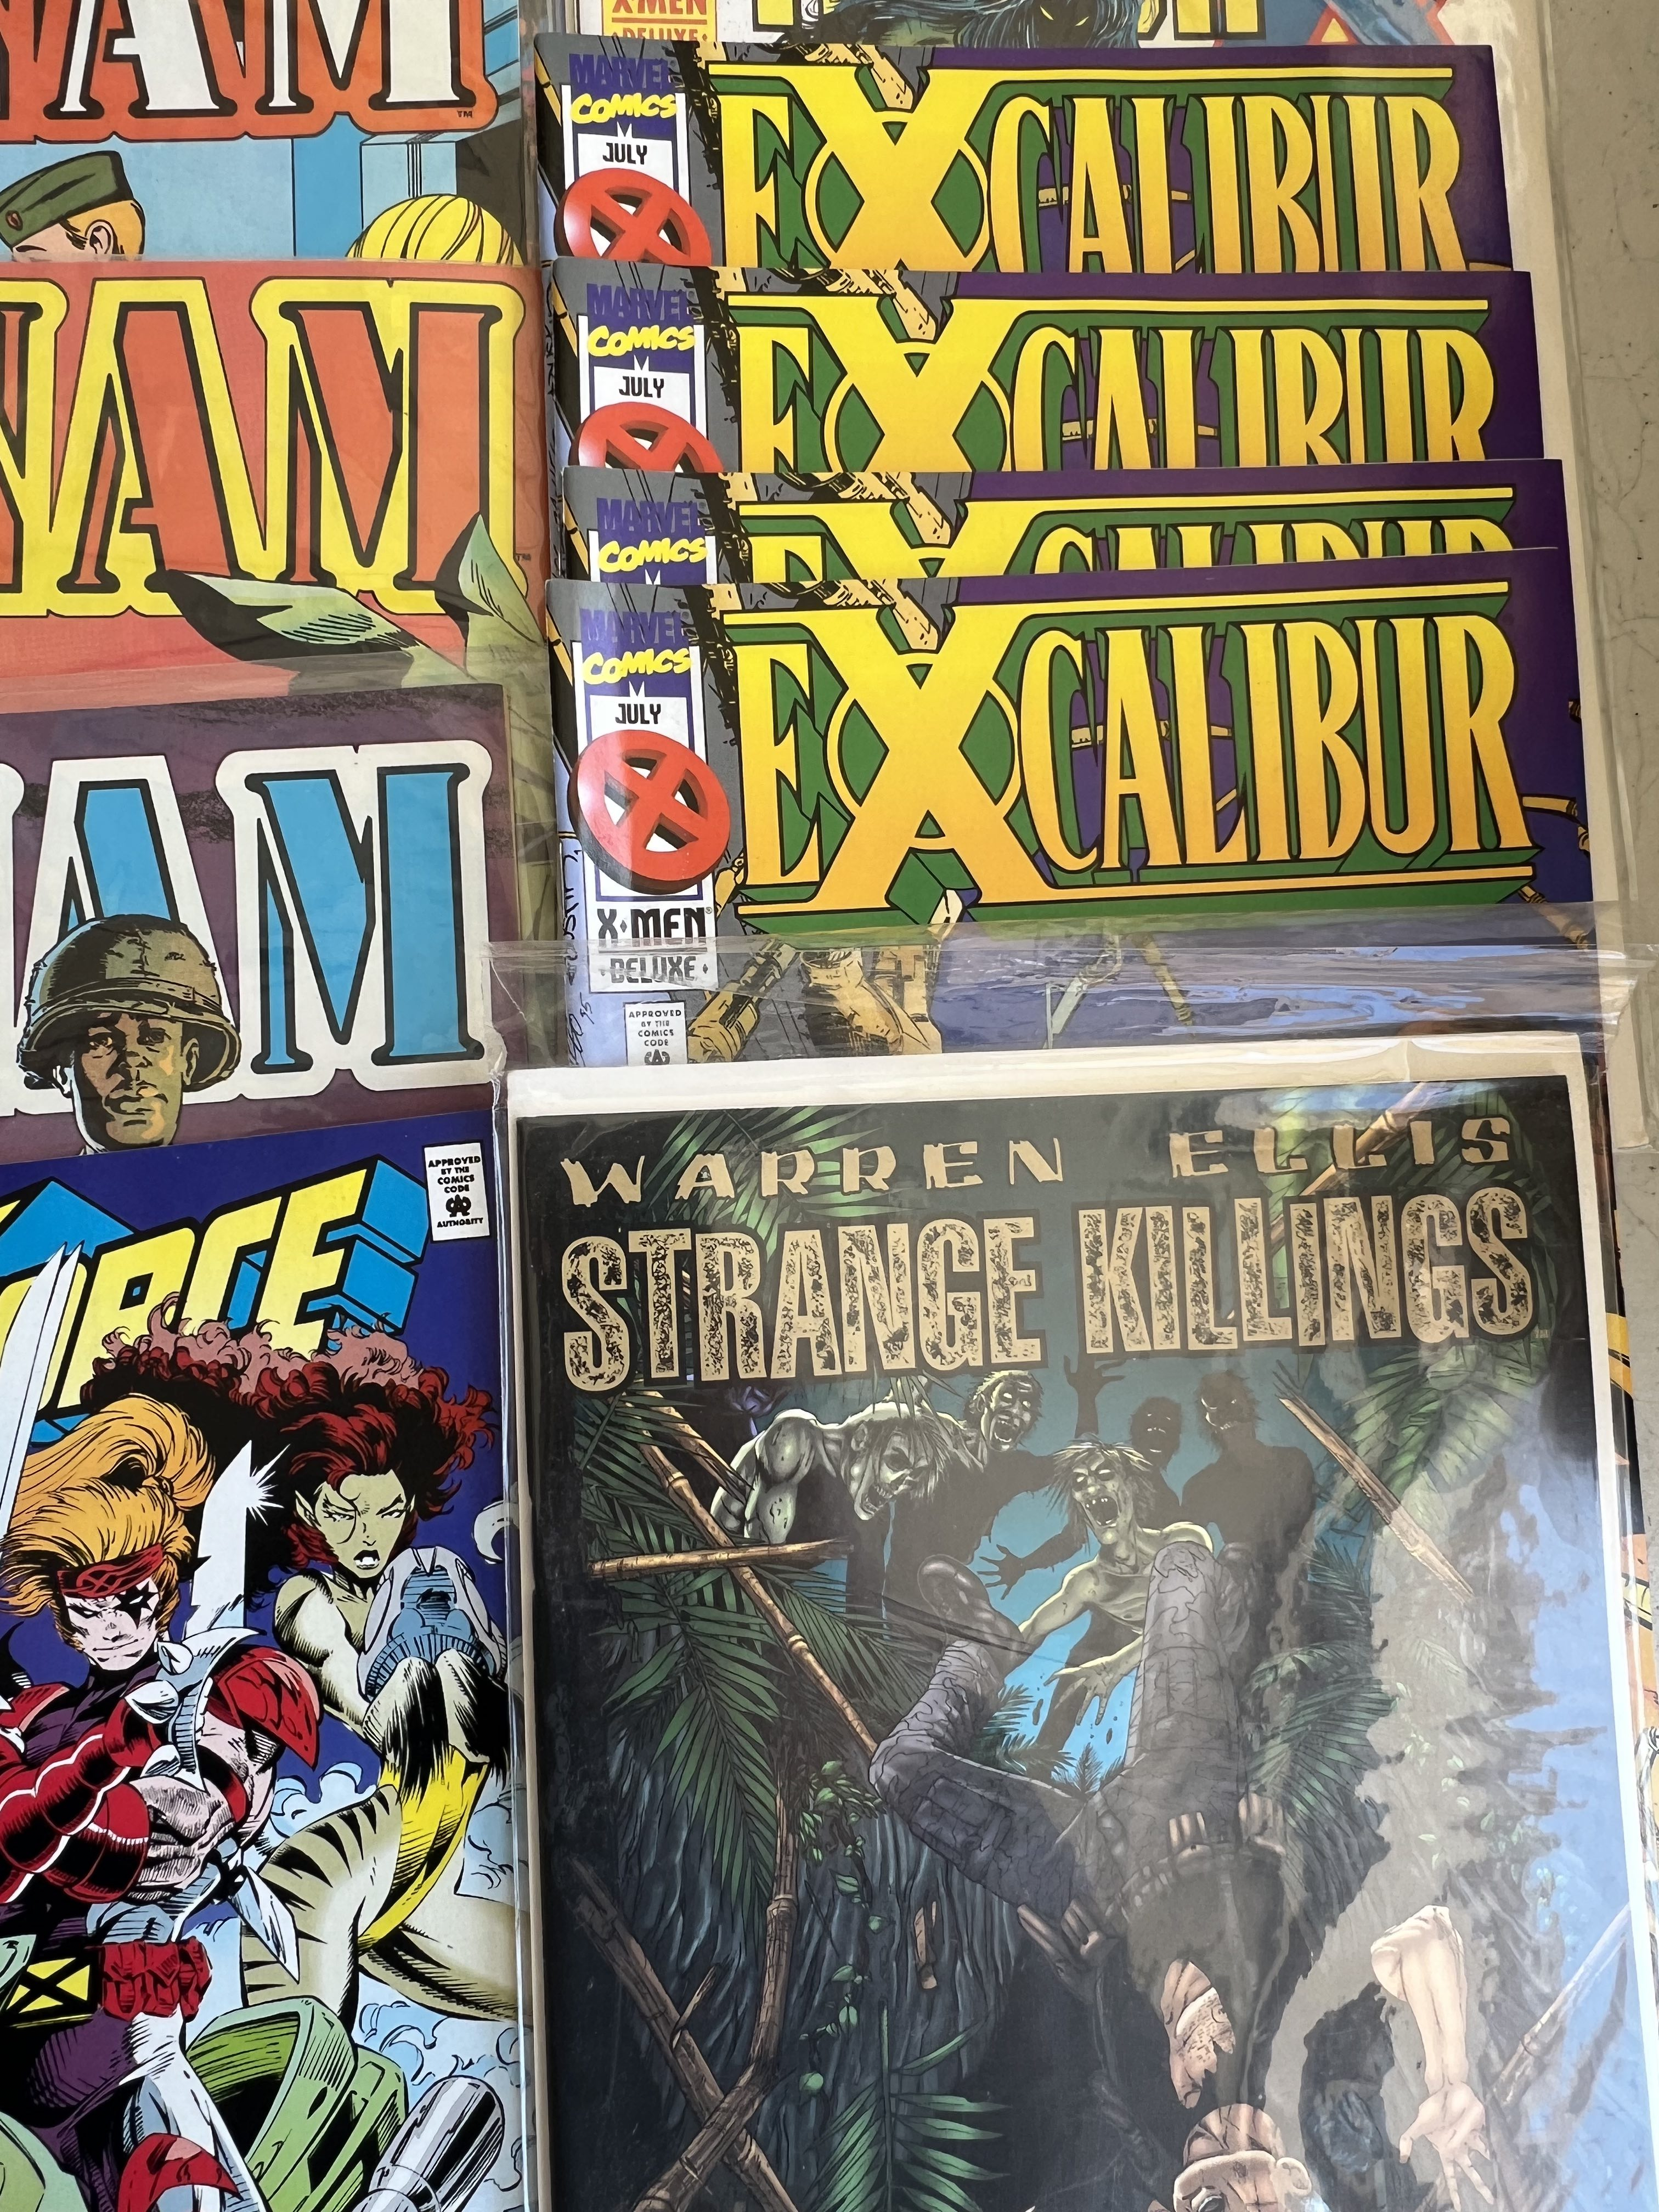 Comic Book collection lot 30 Independent Publishers